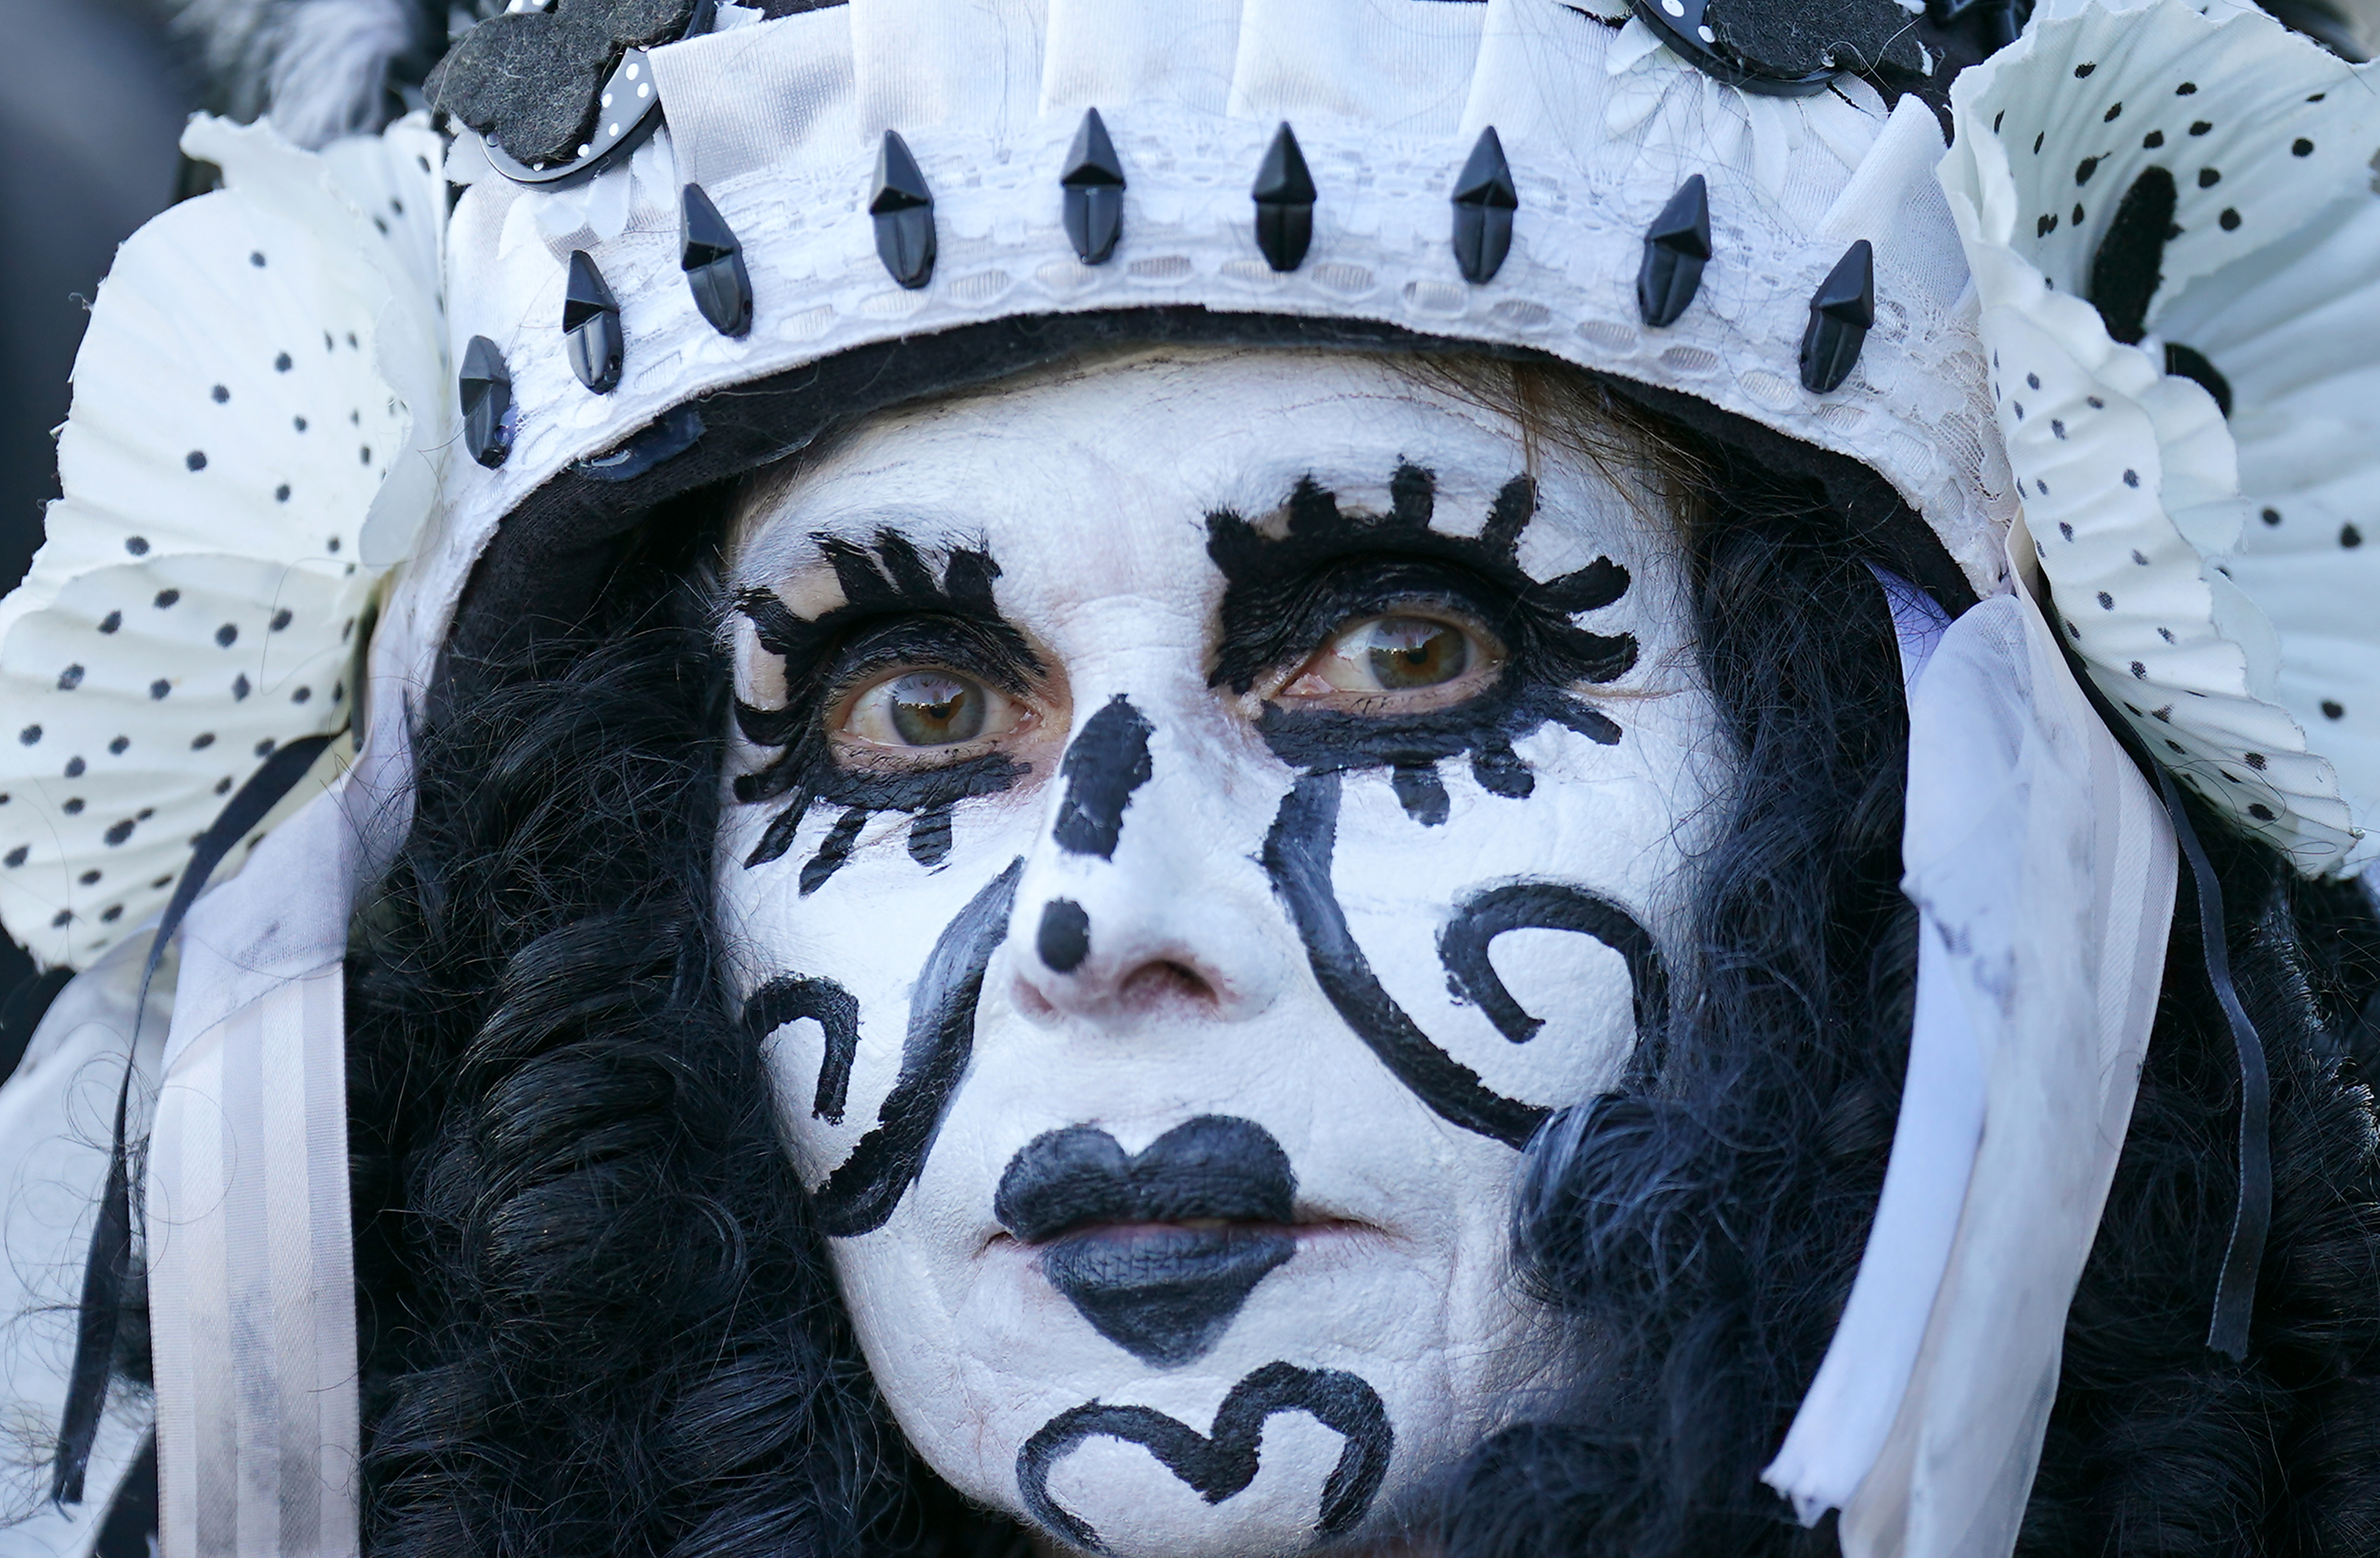 A close up of a woman wearing dramatic black and white face paint during the festival 